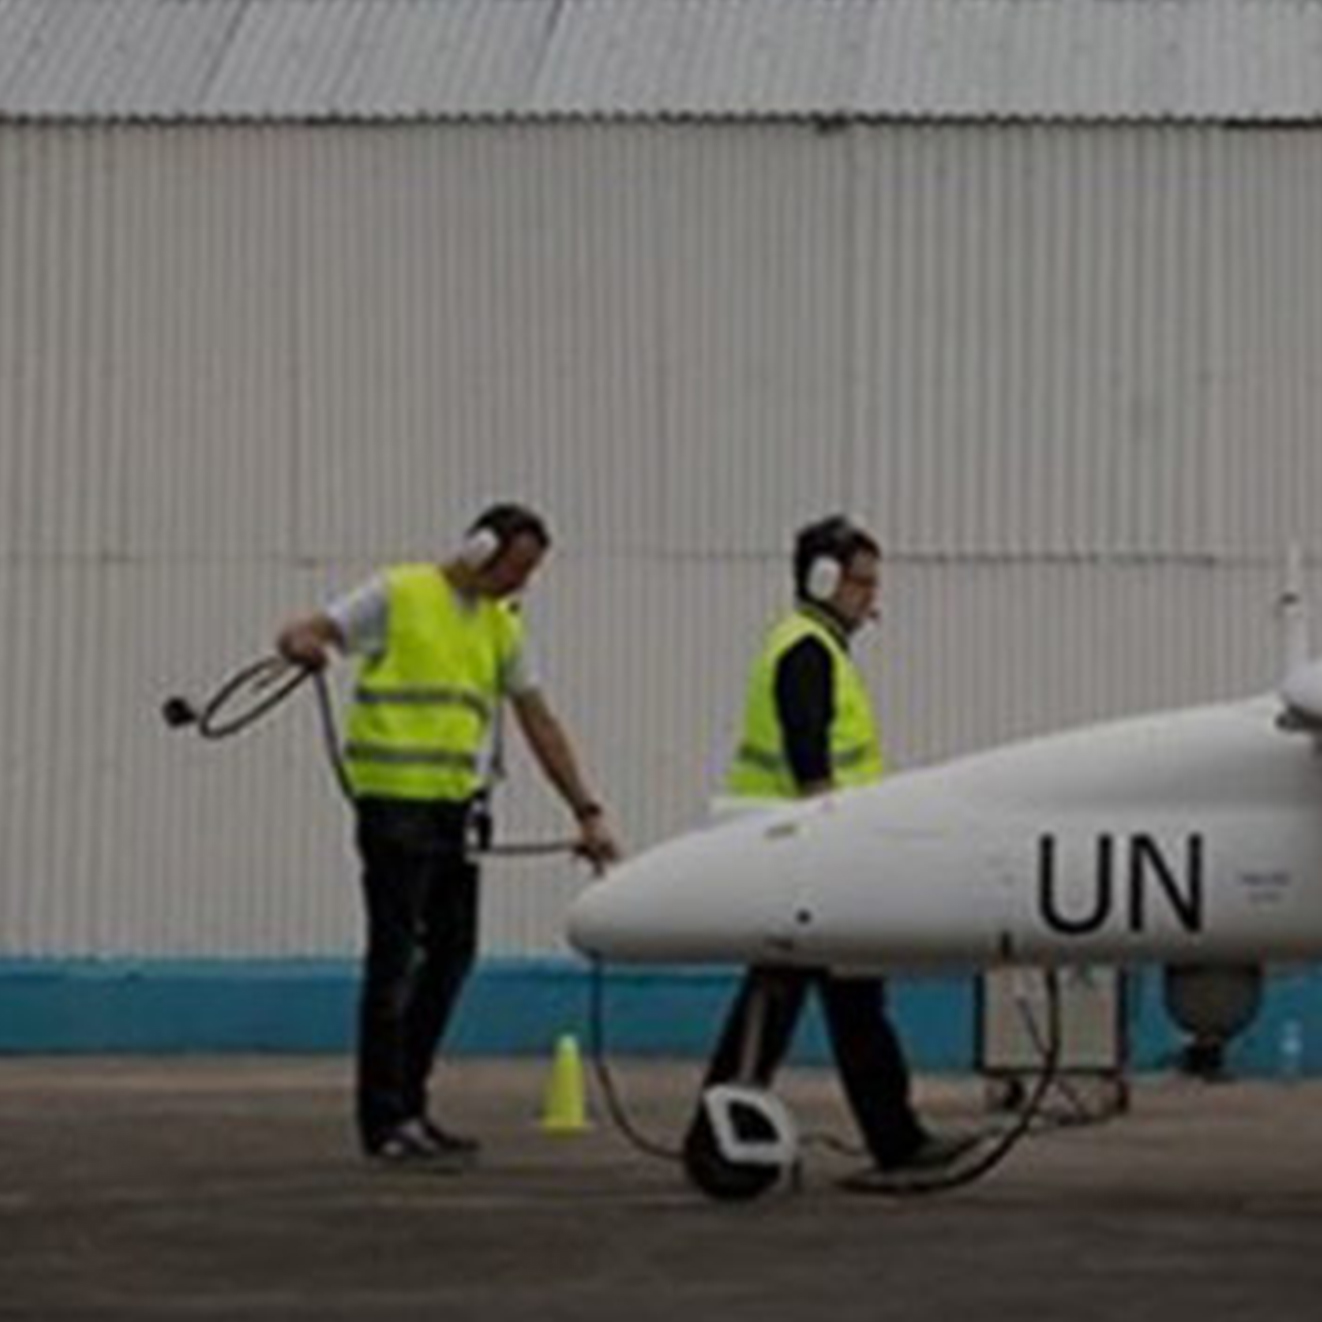 ISR operations unmanned aircraft systems